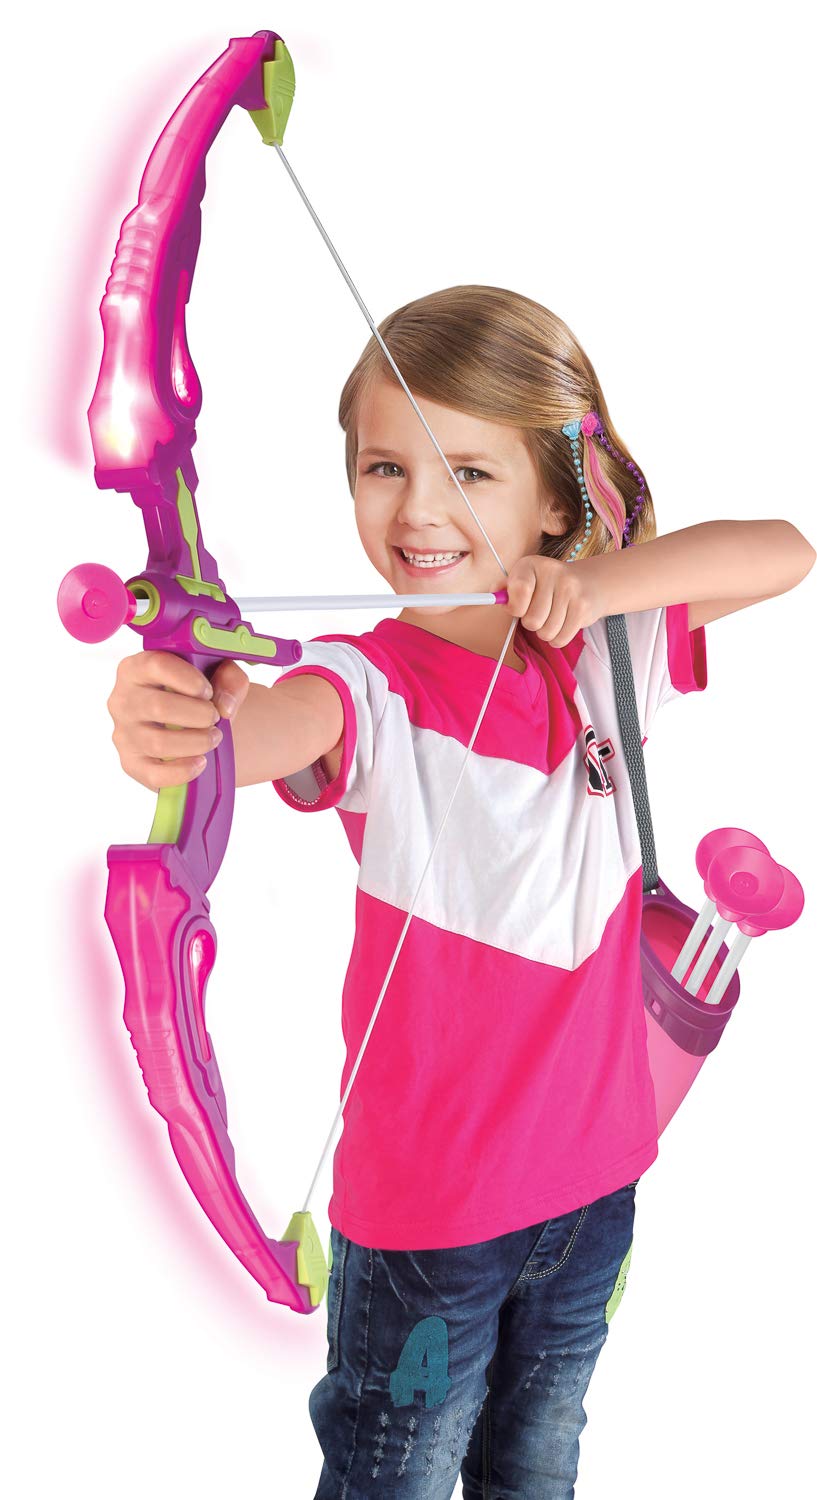 Click N' Play Pink Bow and Arrow Light Up Archery Set | Sport Set for Girls Outdoor Hunting Play | Pink Bow, 3 Suction Cup Arrows, Target, and Quiver - image 5 of 5